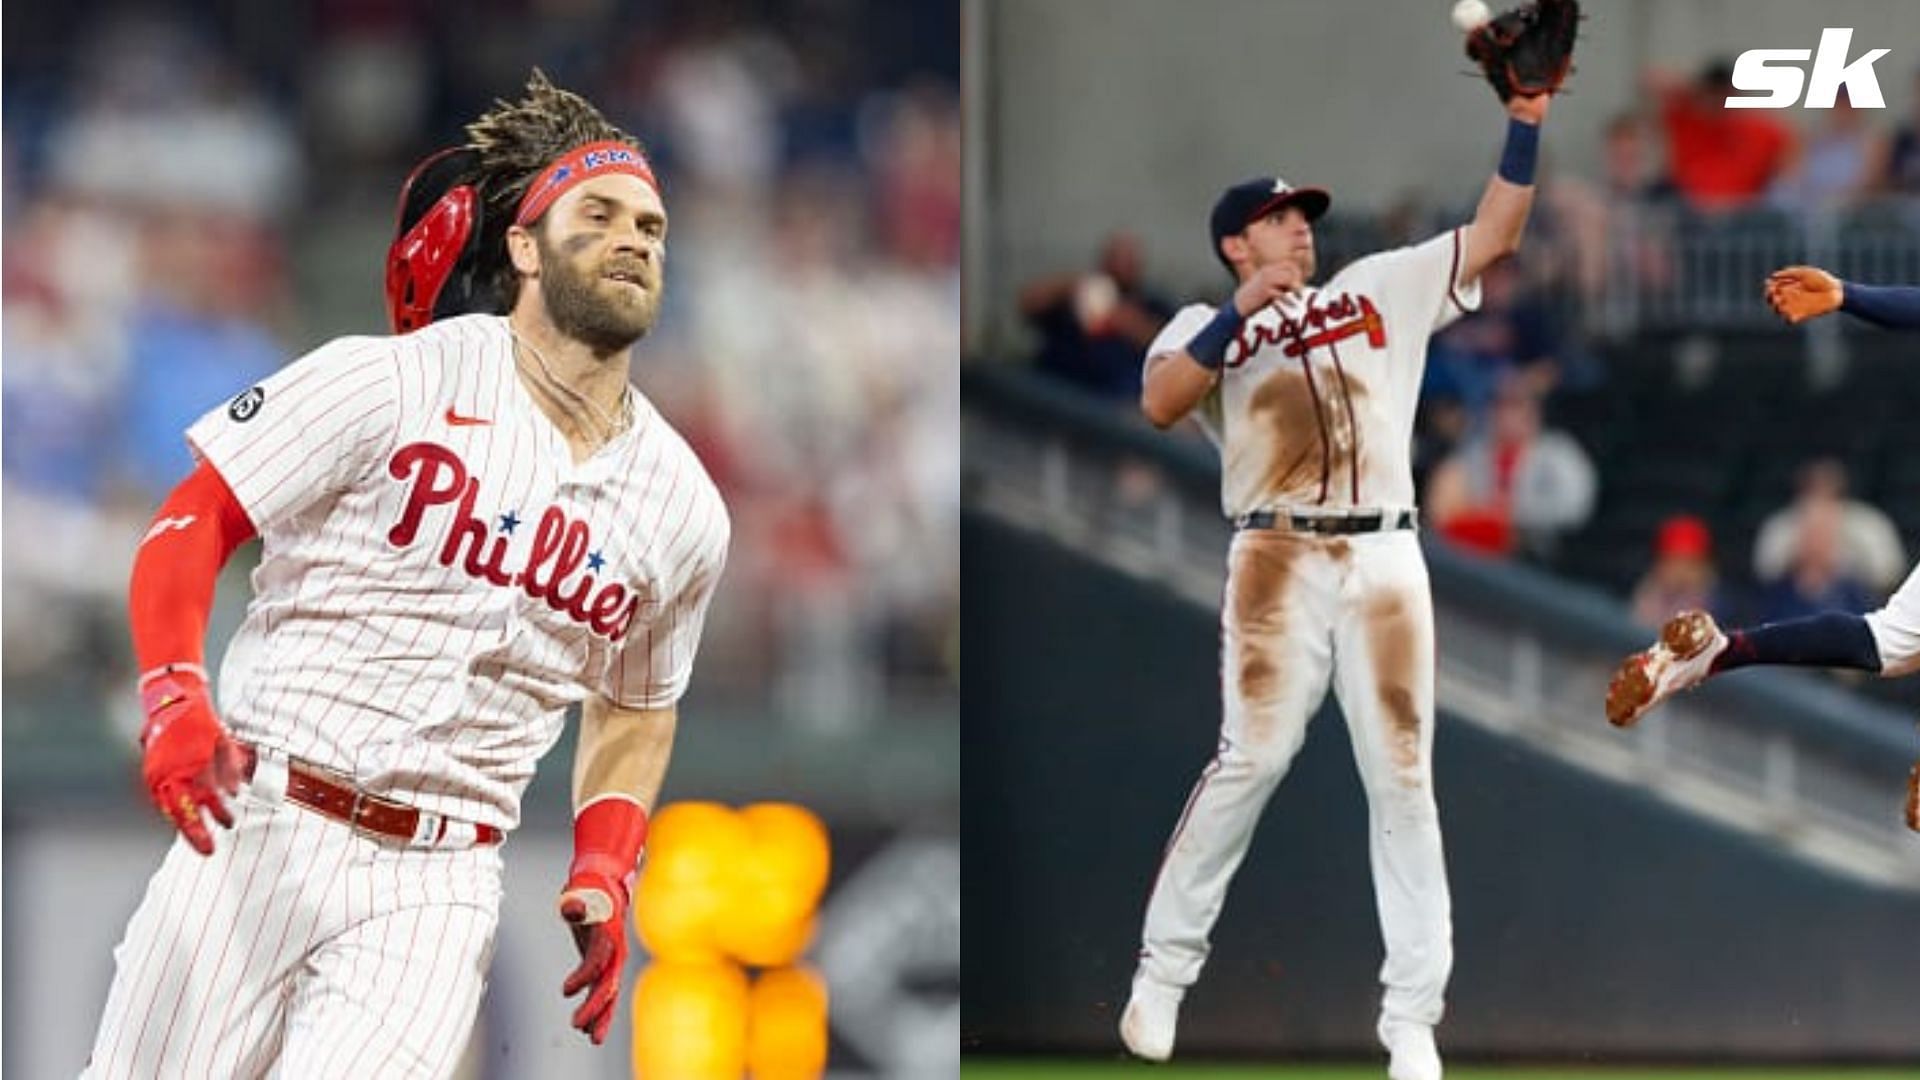 The 2 huge decisions that led to Phillies star Bryce Harper